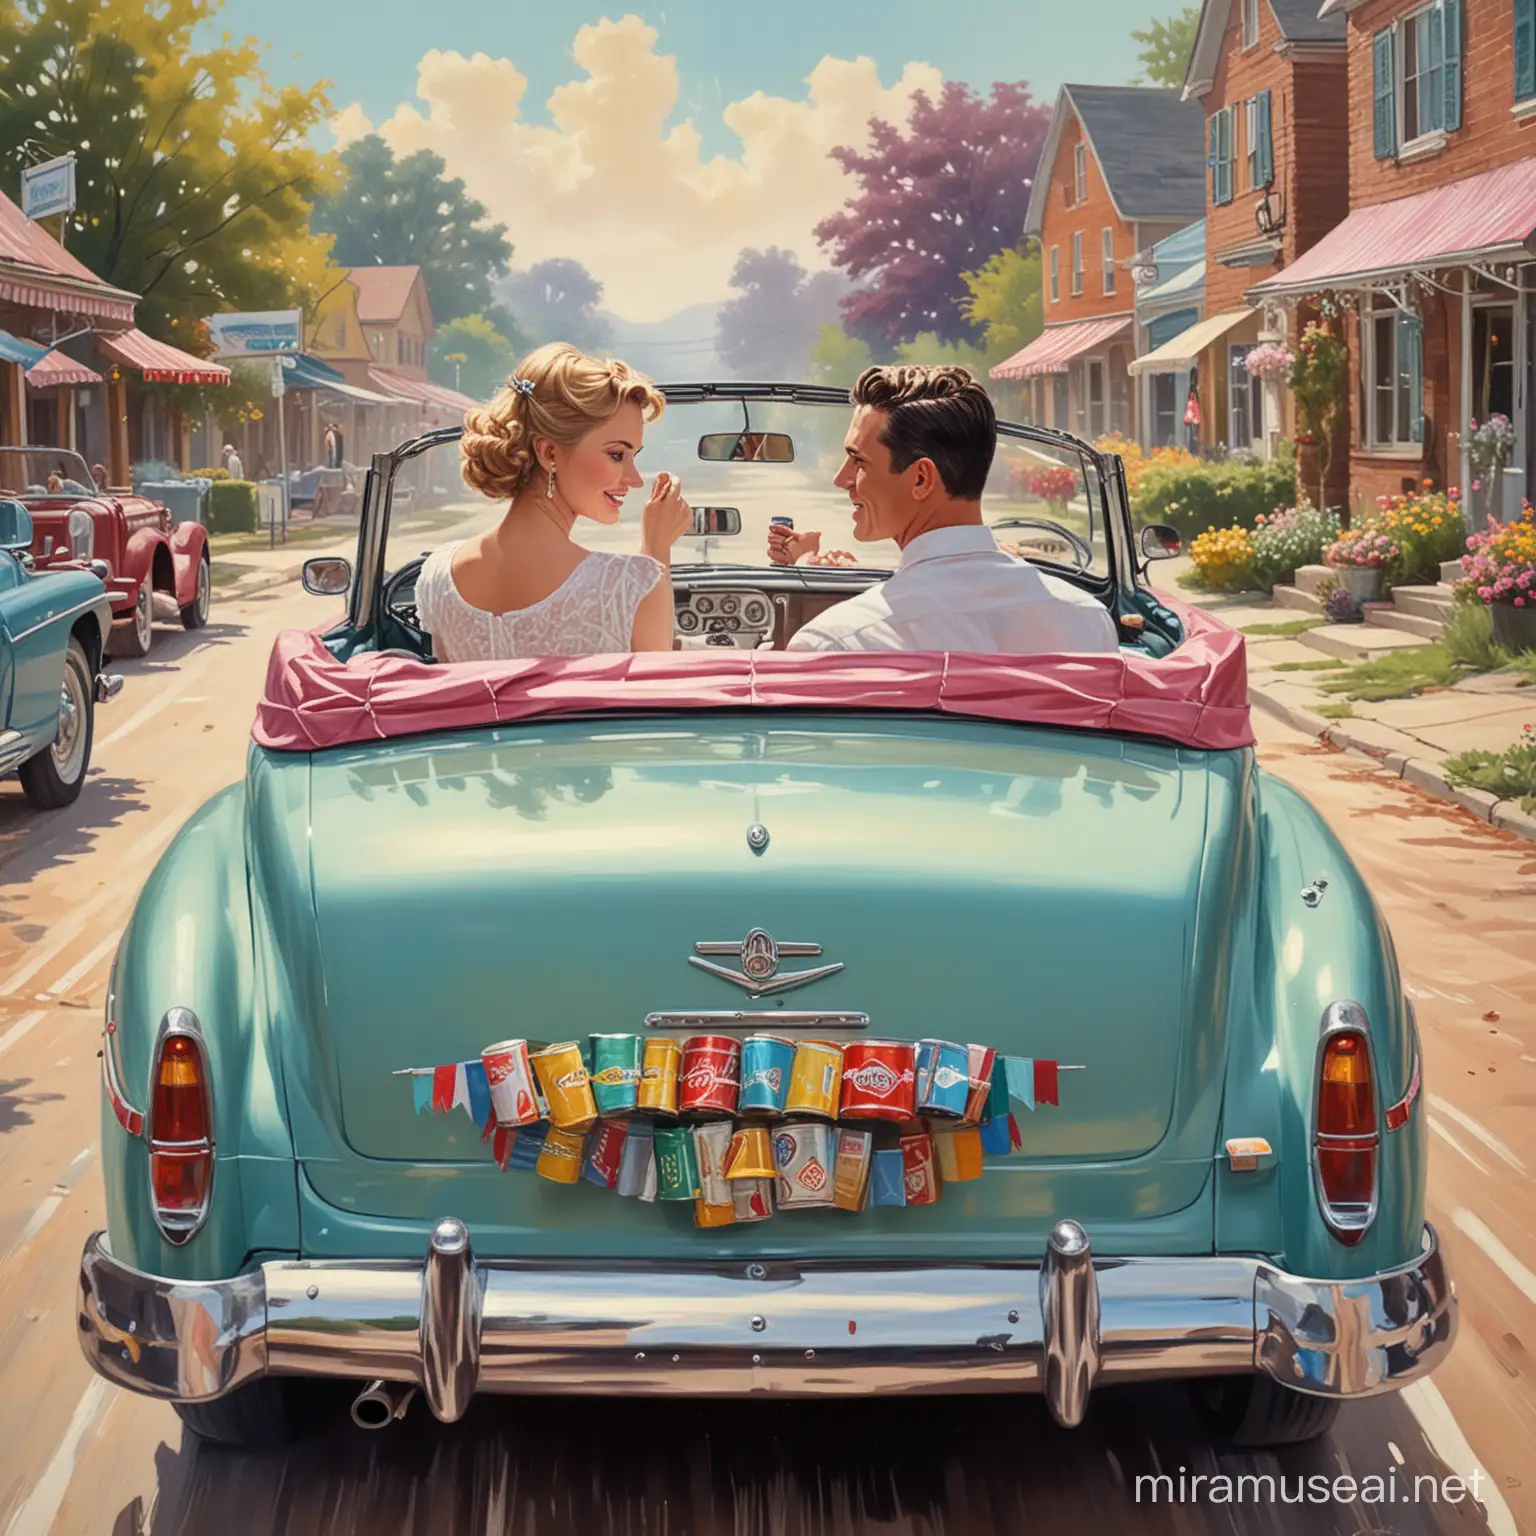 oil painting, man and woman driving away in classic car from the 50s, just married ribbon and tin cans on the back of car, colorful, vintage 